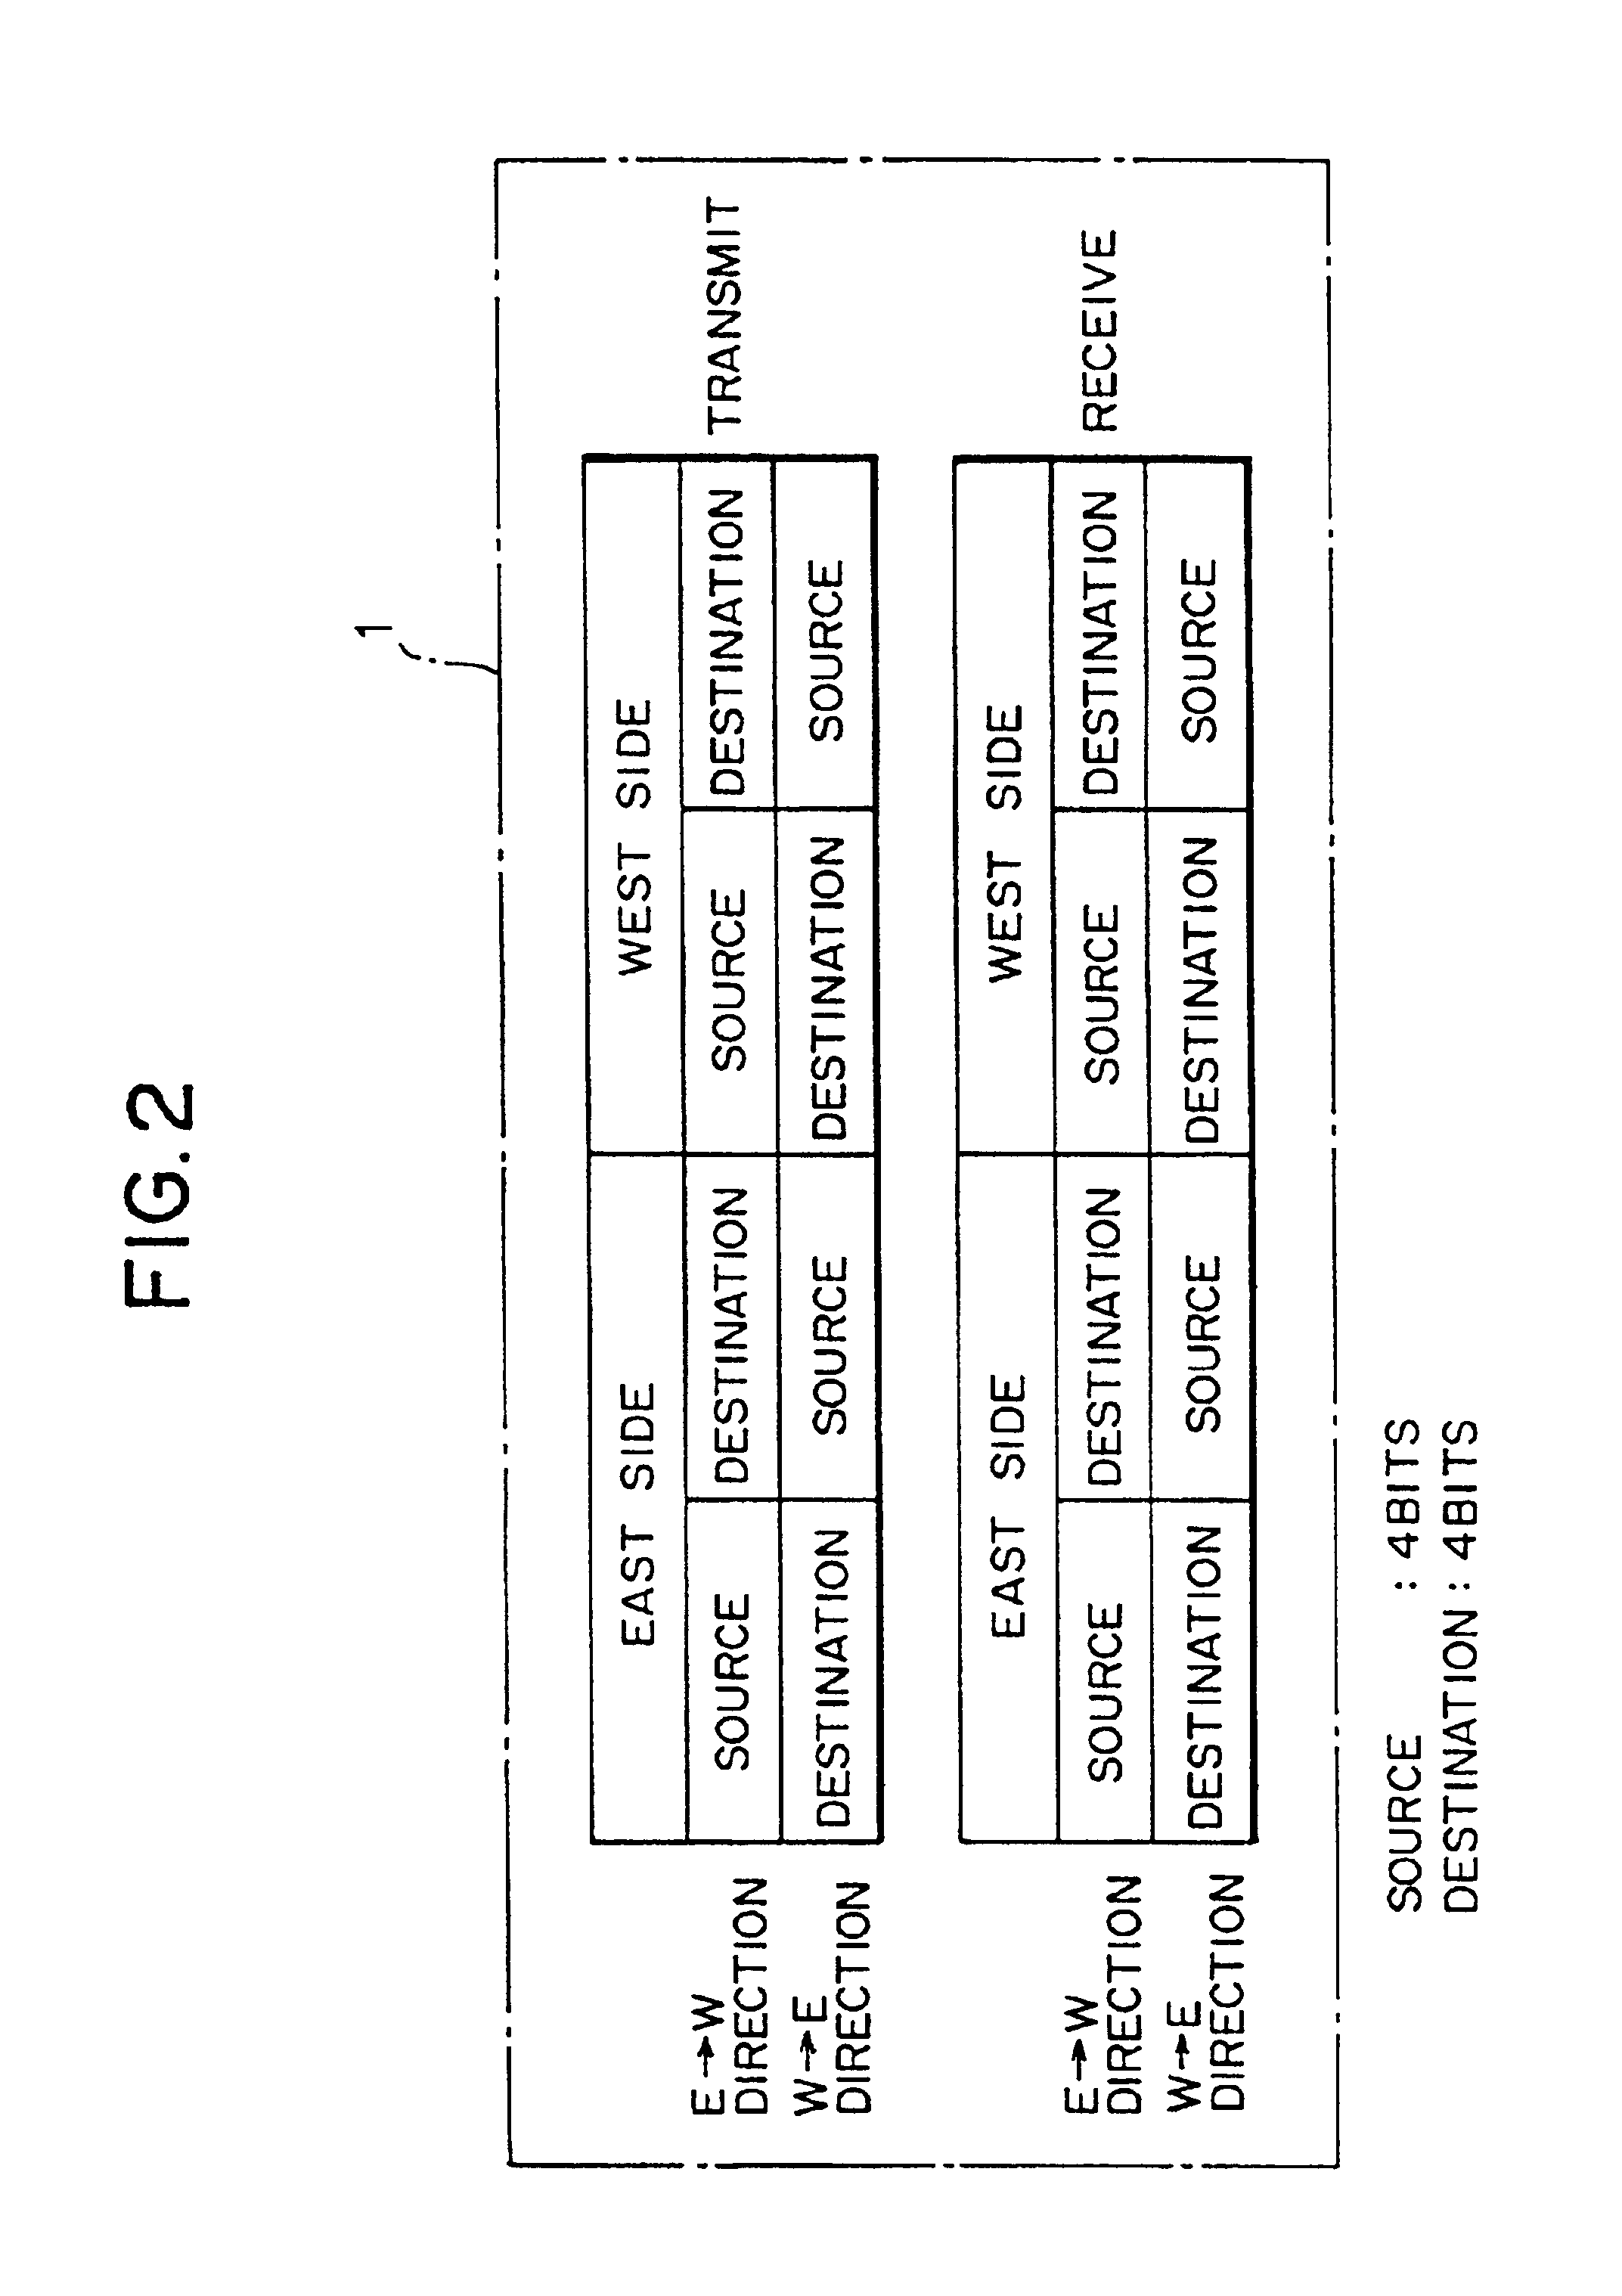 Optical ring transmission system using squelch method